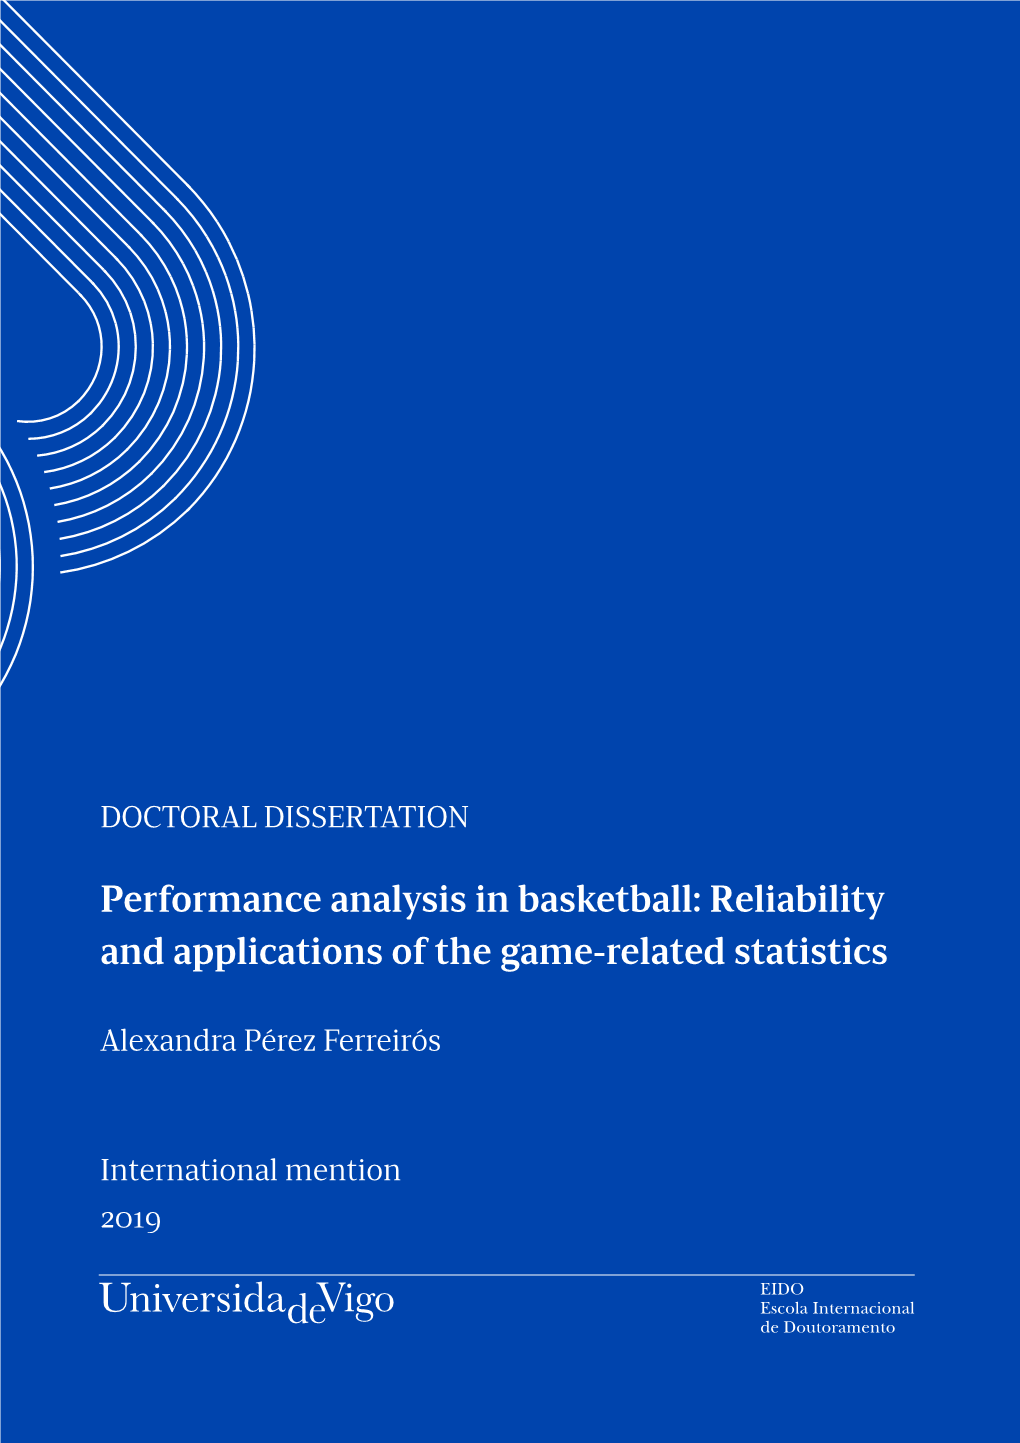 Performance Analysis in Basketball: Reliability and Applications of the Game-Related Statistics